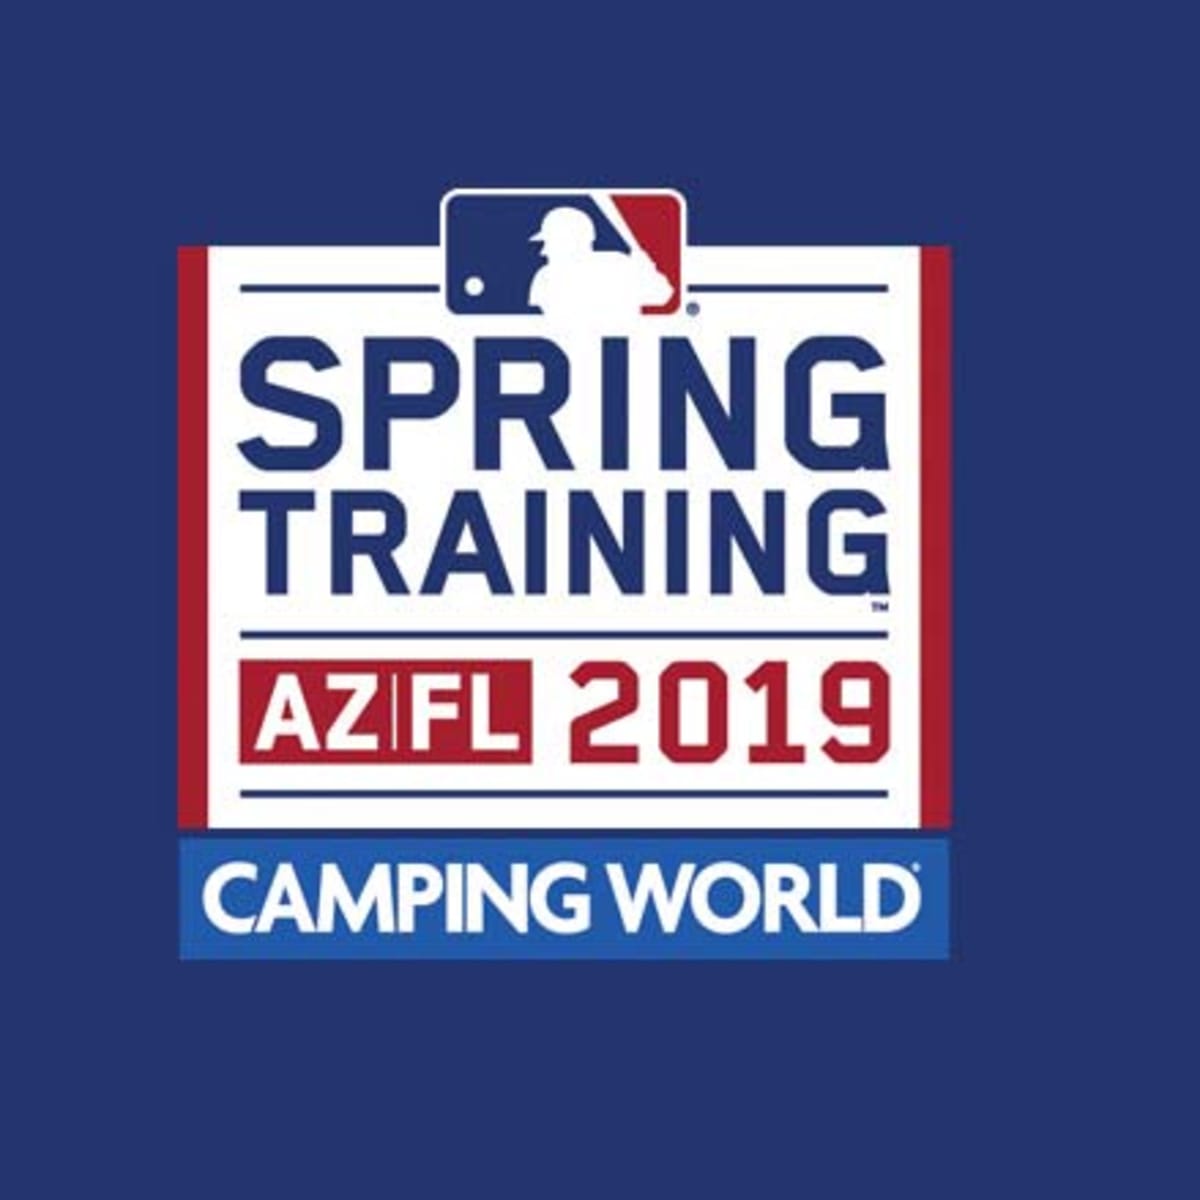 Pitchers and catchers 2019 report dates